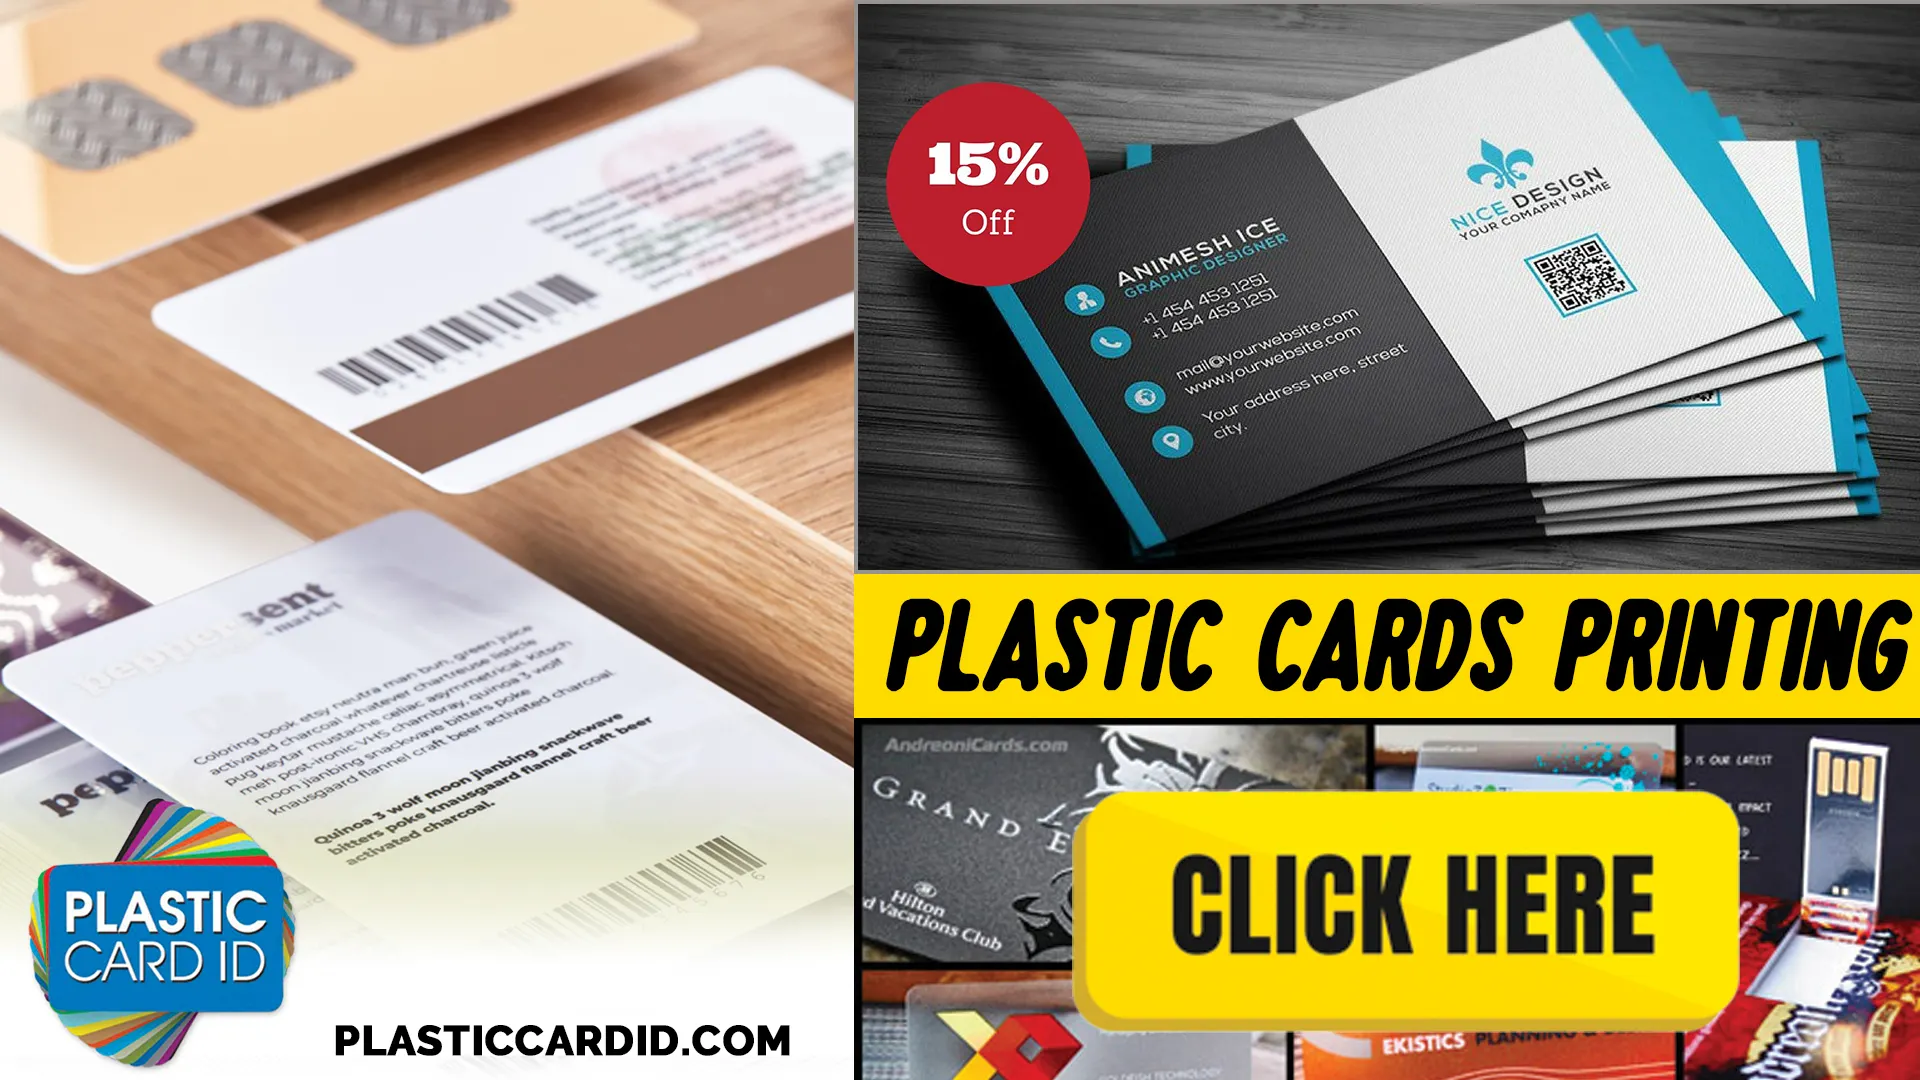 Integrating Plastic Cards into Your Omnichannel Marketing Strategy